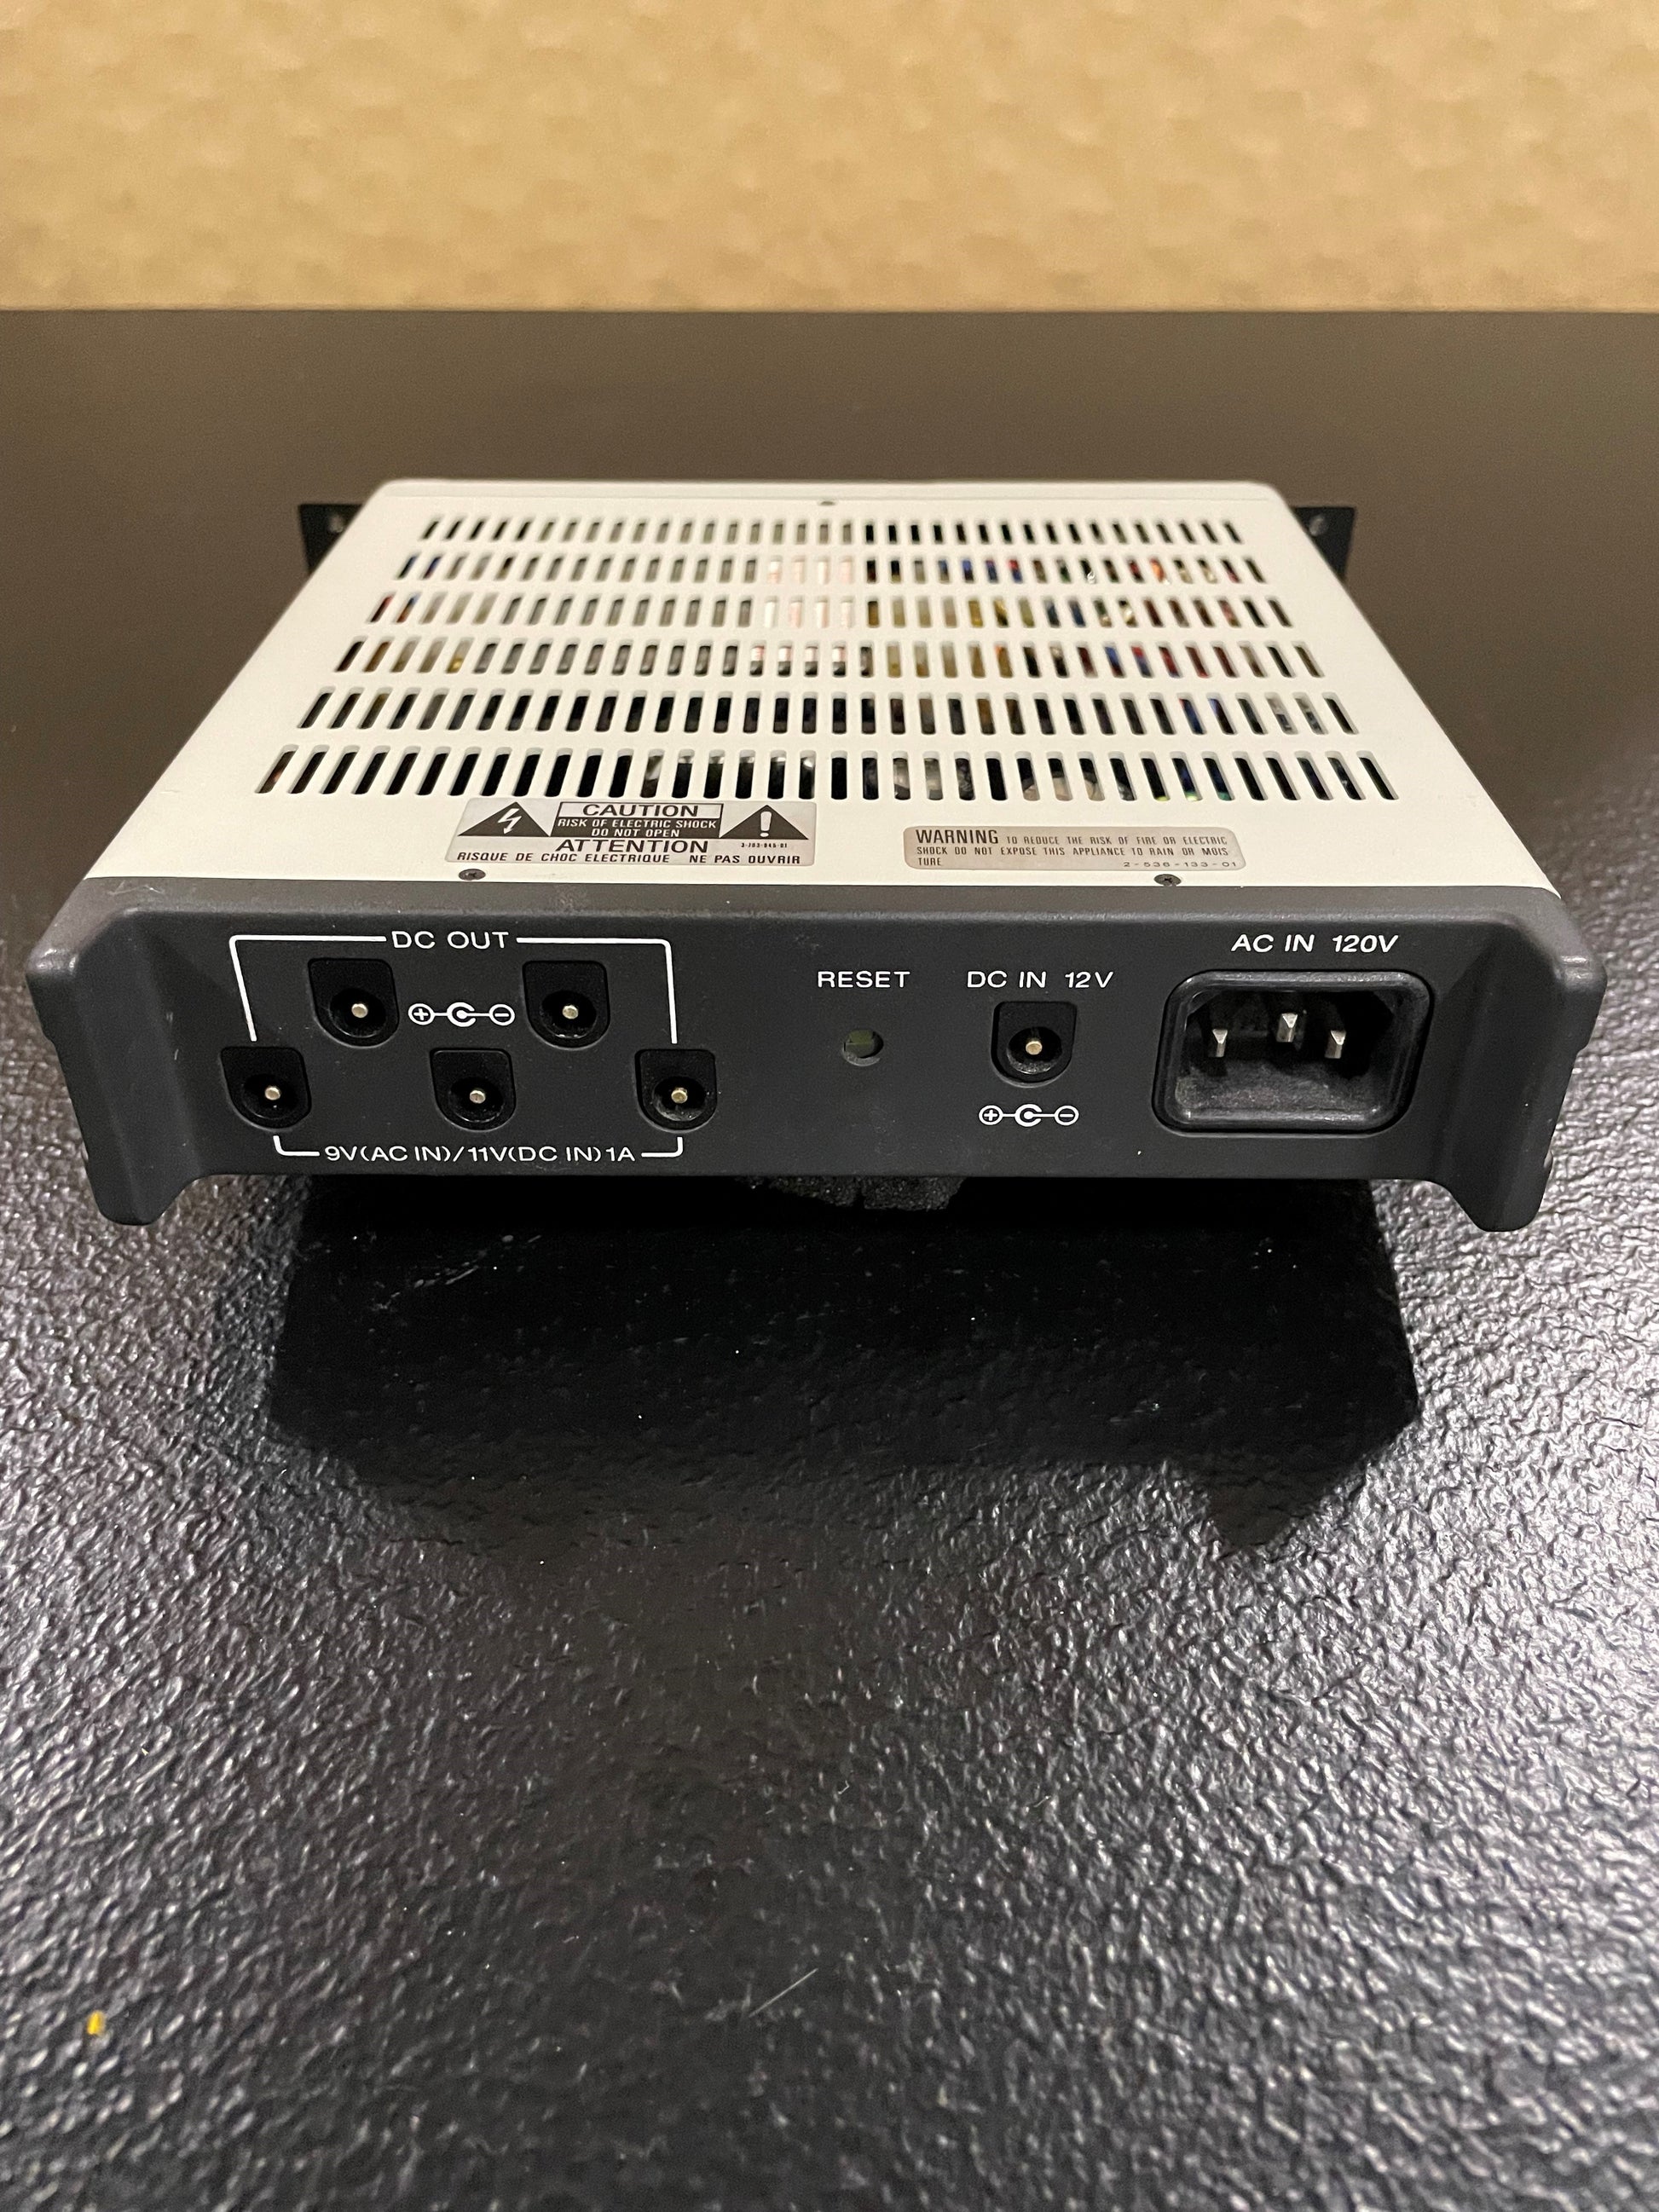 SONY AC-P210 Power Supply. We Sell Professional Audio Equipment. Audio Systems, Amplifiers, Consoles, Mixers, Electronics, Entertainment, Live Sound.